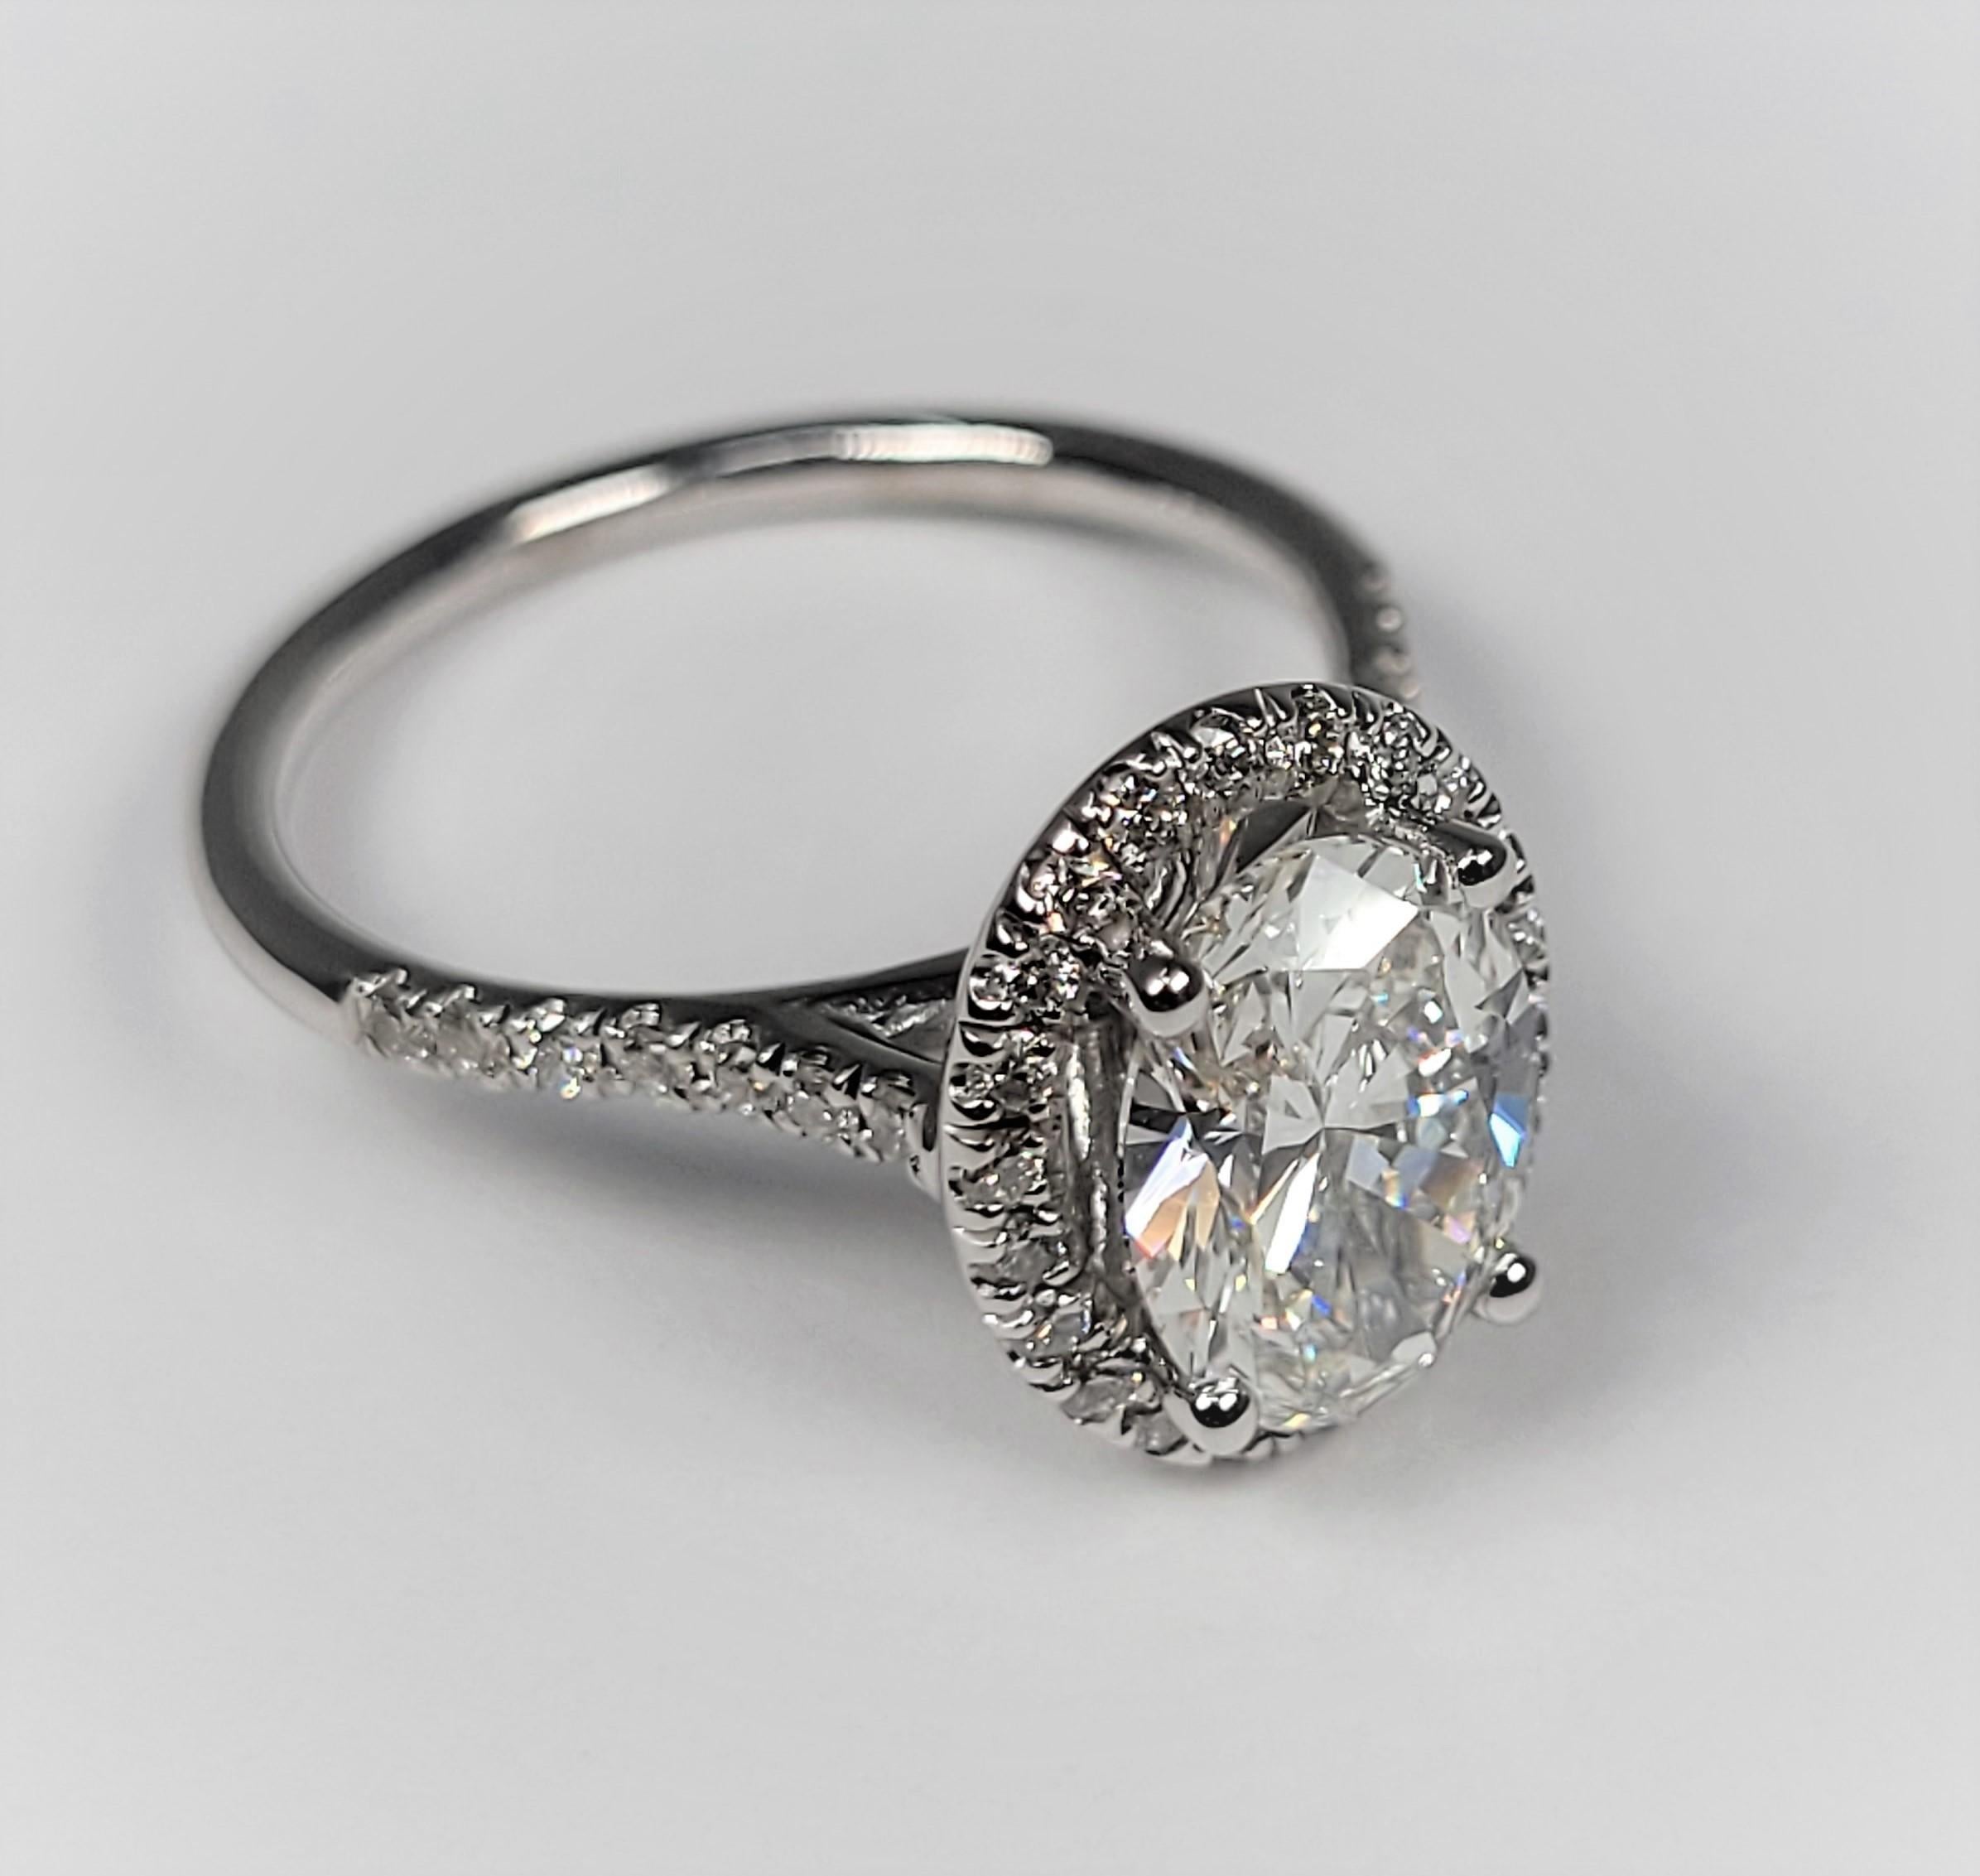 This stunning 18 karat white gold and diamond ring is a beauty!  The center is accompanied by a GIA grading report which lists the stone as a 1.69 carat oval, SI 2 in clarity and G in color.  There are an estimated 0.45 carats of side stones